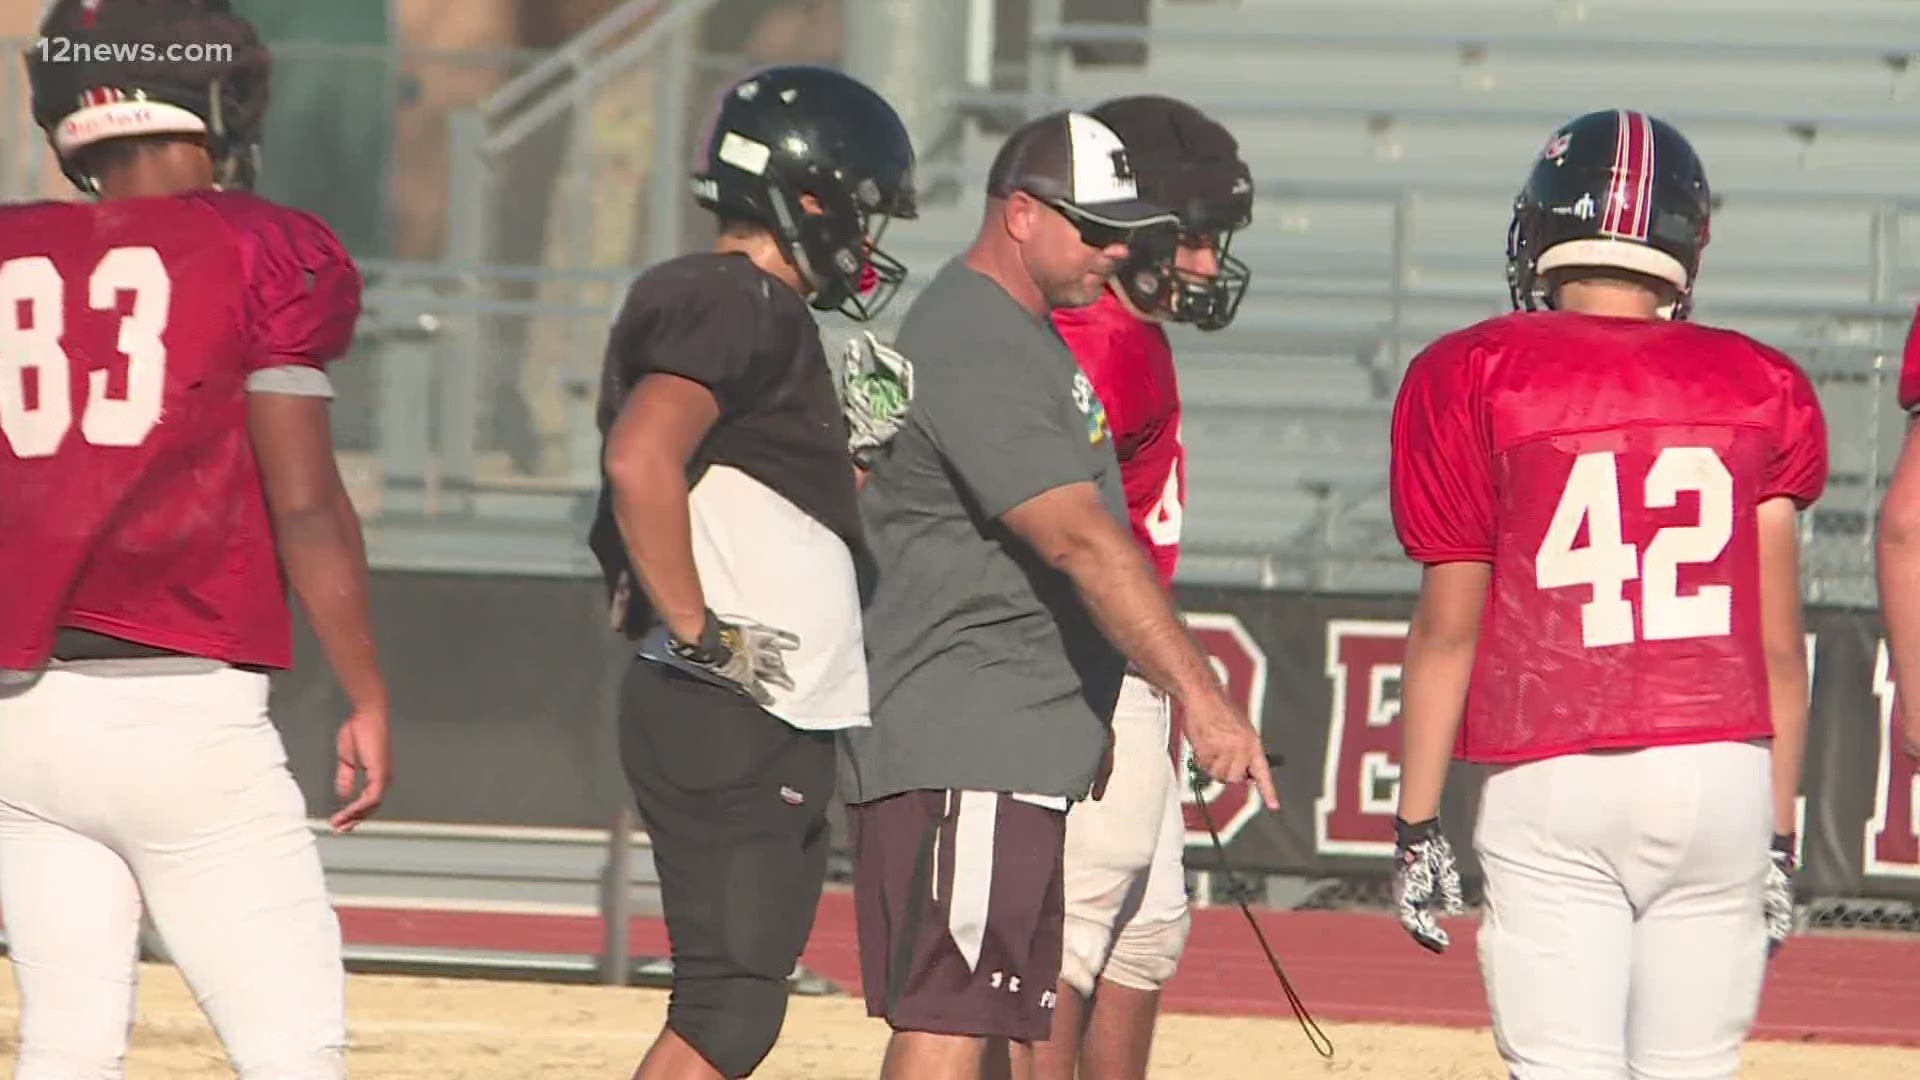 The spike in COVID-19 cases in Arizona is forcing more changes in the sports world. The start of the high school football season has been delayed.